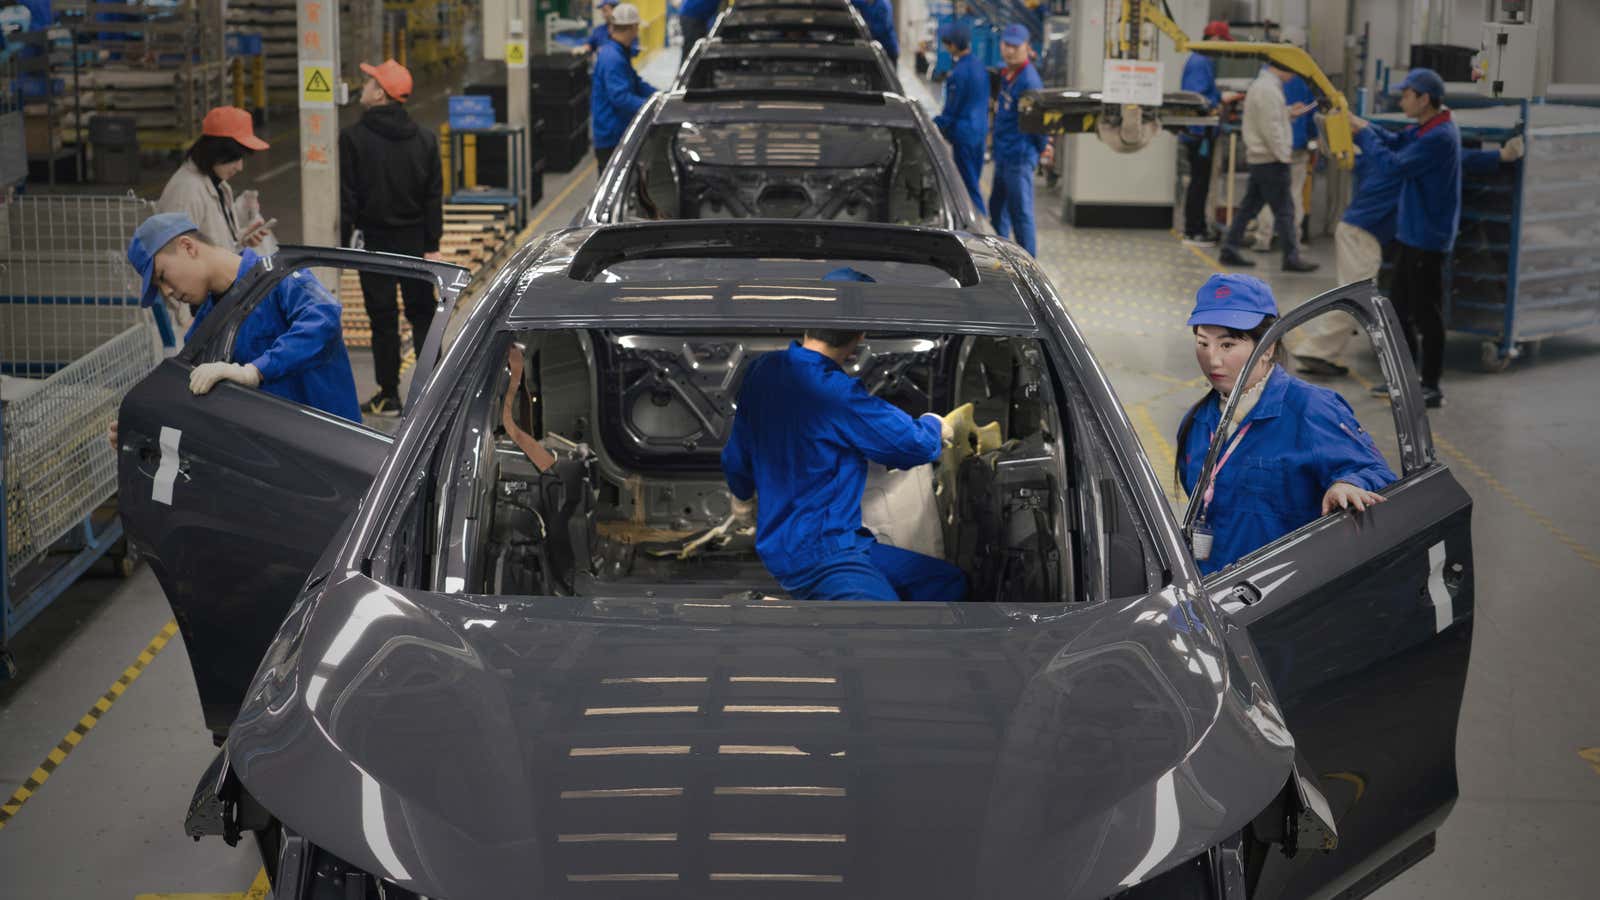 Workers assemble battery-powered automobiles with the help of automated and semi-automated processes at a BYD factory in Shenzhen in southern China.